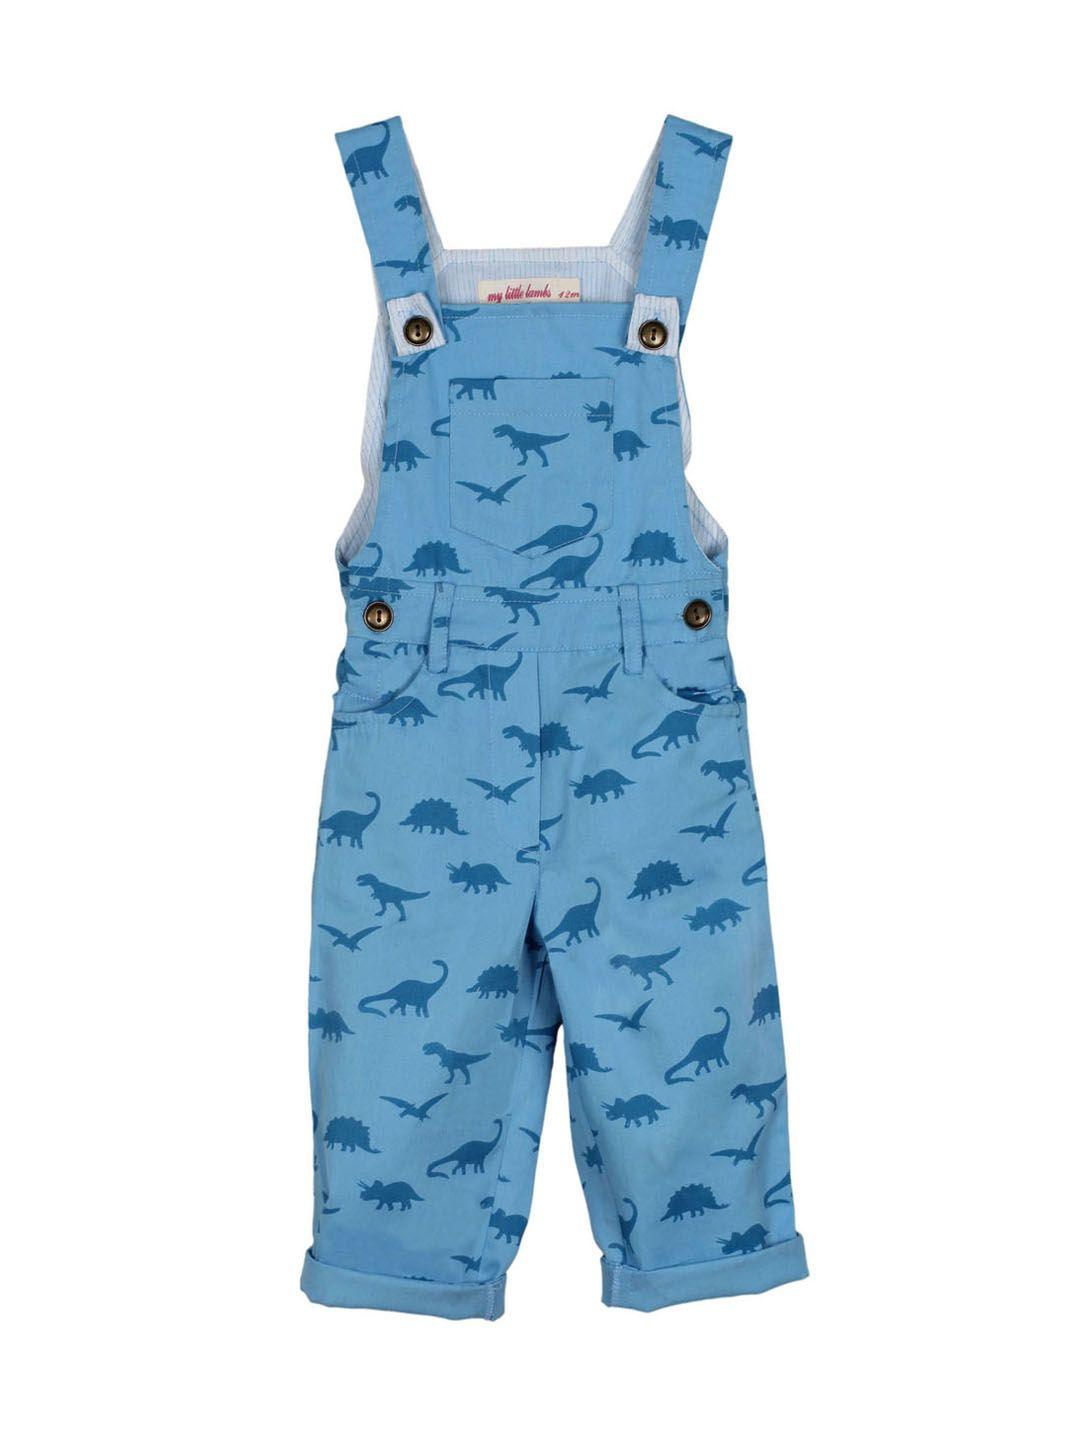 my-little-lambs-unisex-blue-printed-dungarees